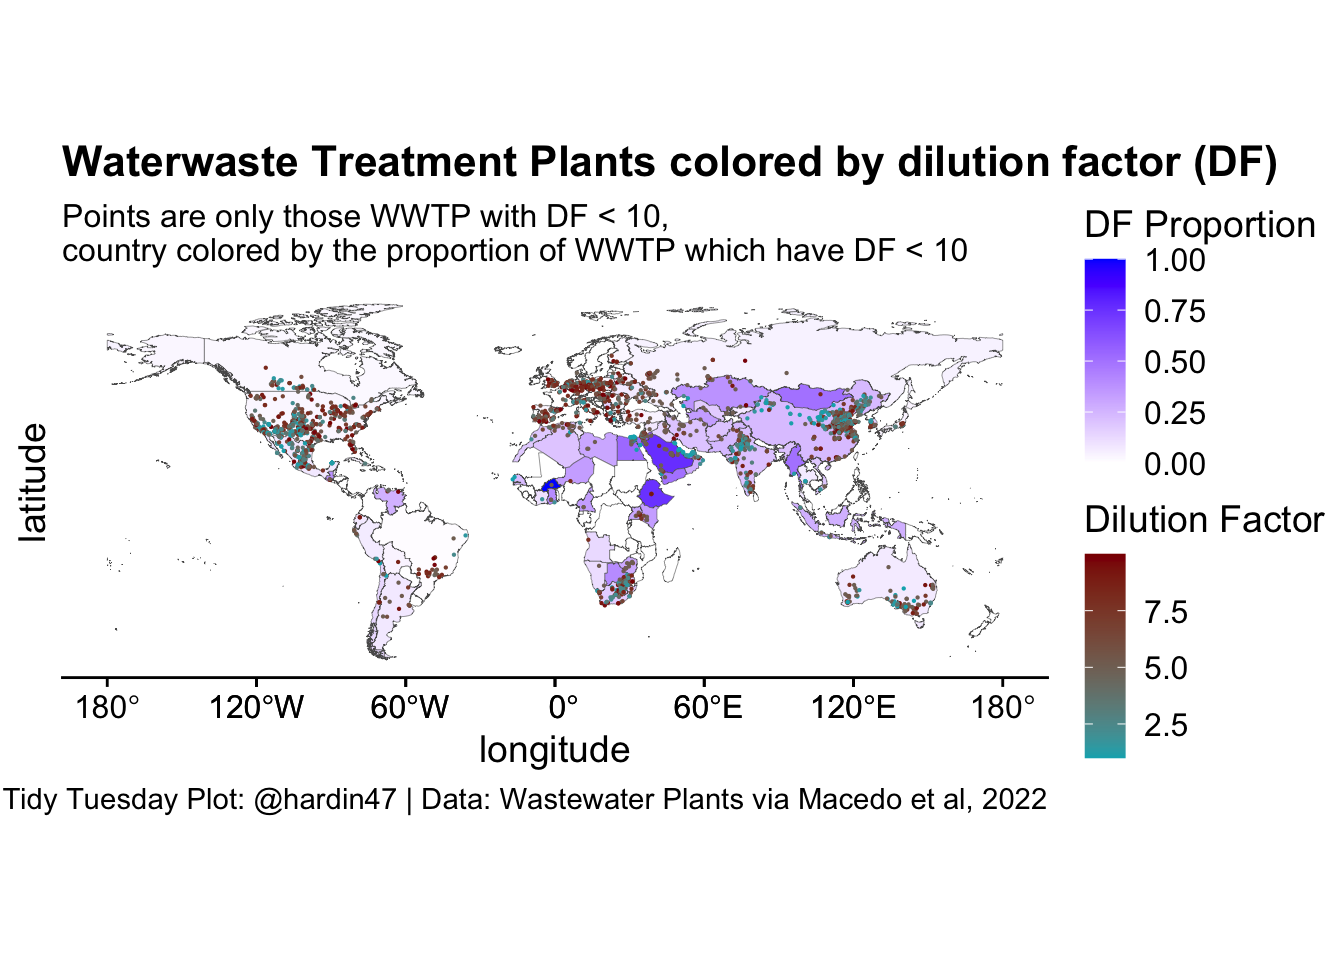 World map plot with countries colored and points at the location for each waste water treatment plant with dilution factor less than 10.